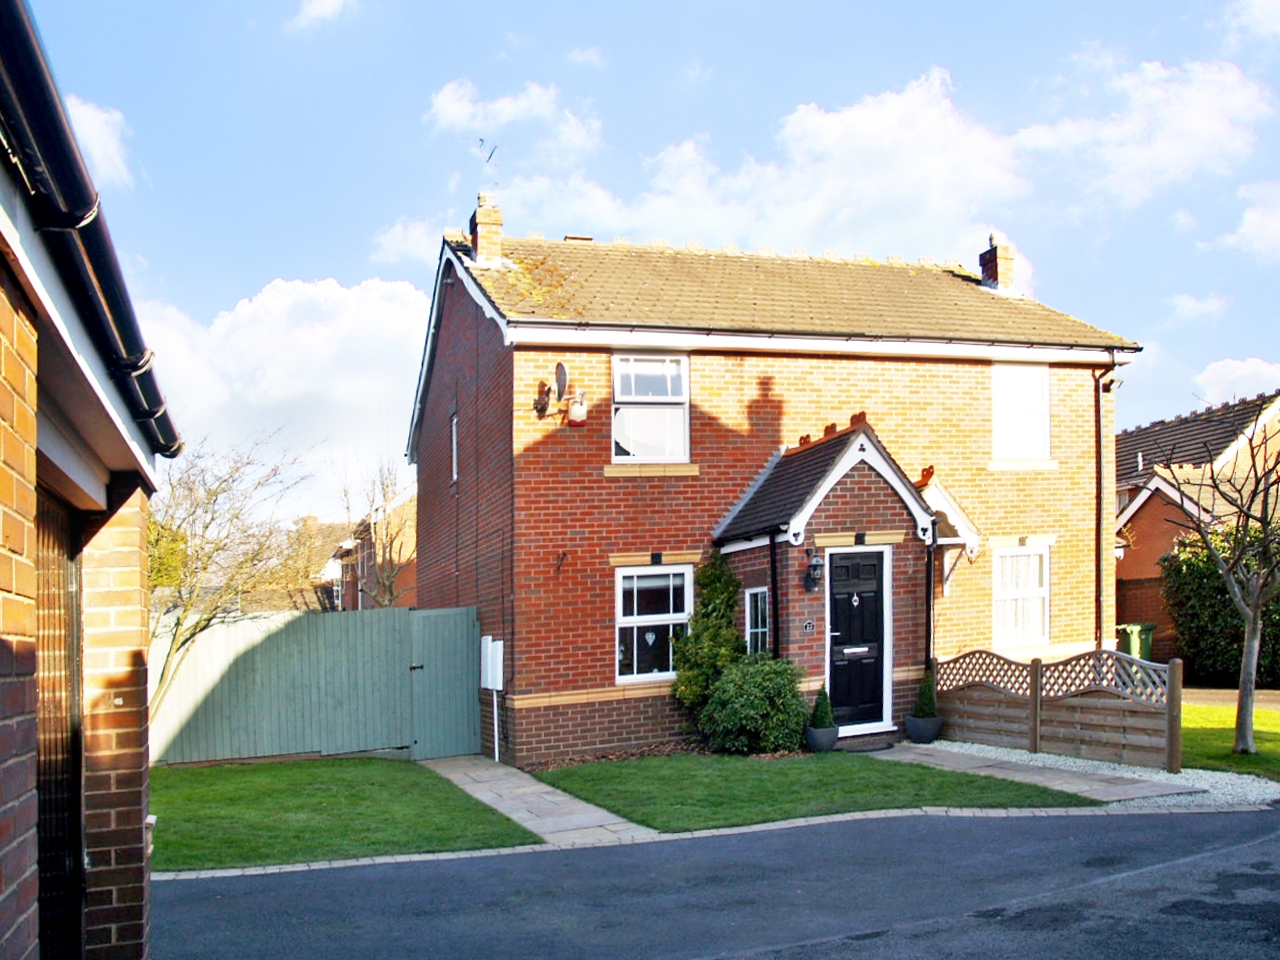 3 bedroom semi detached house SSTC in Solihull - Main Image.